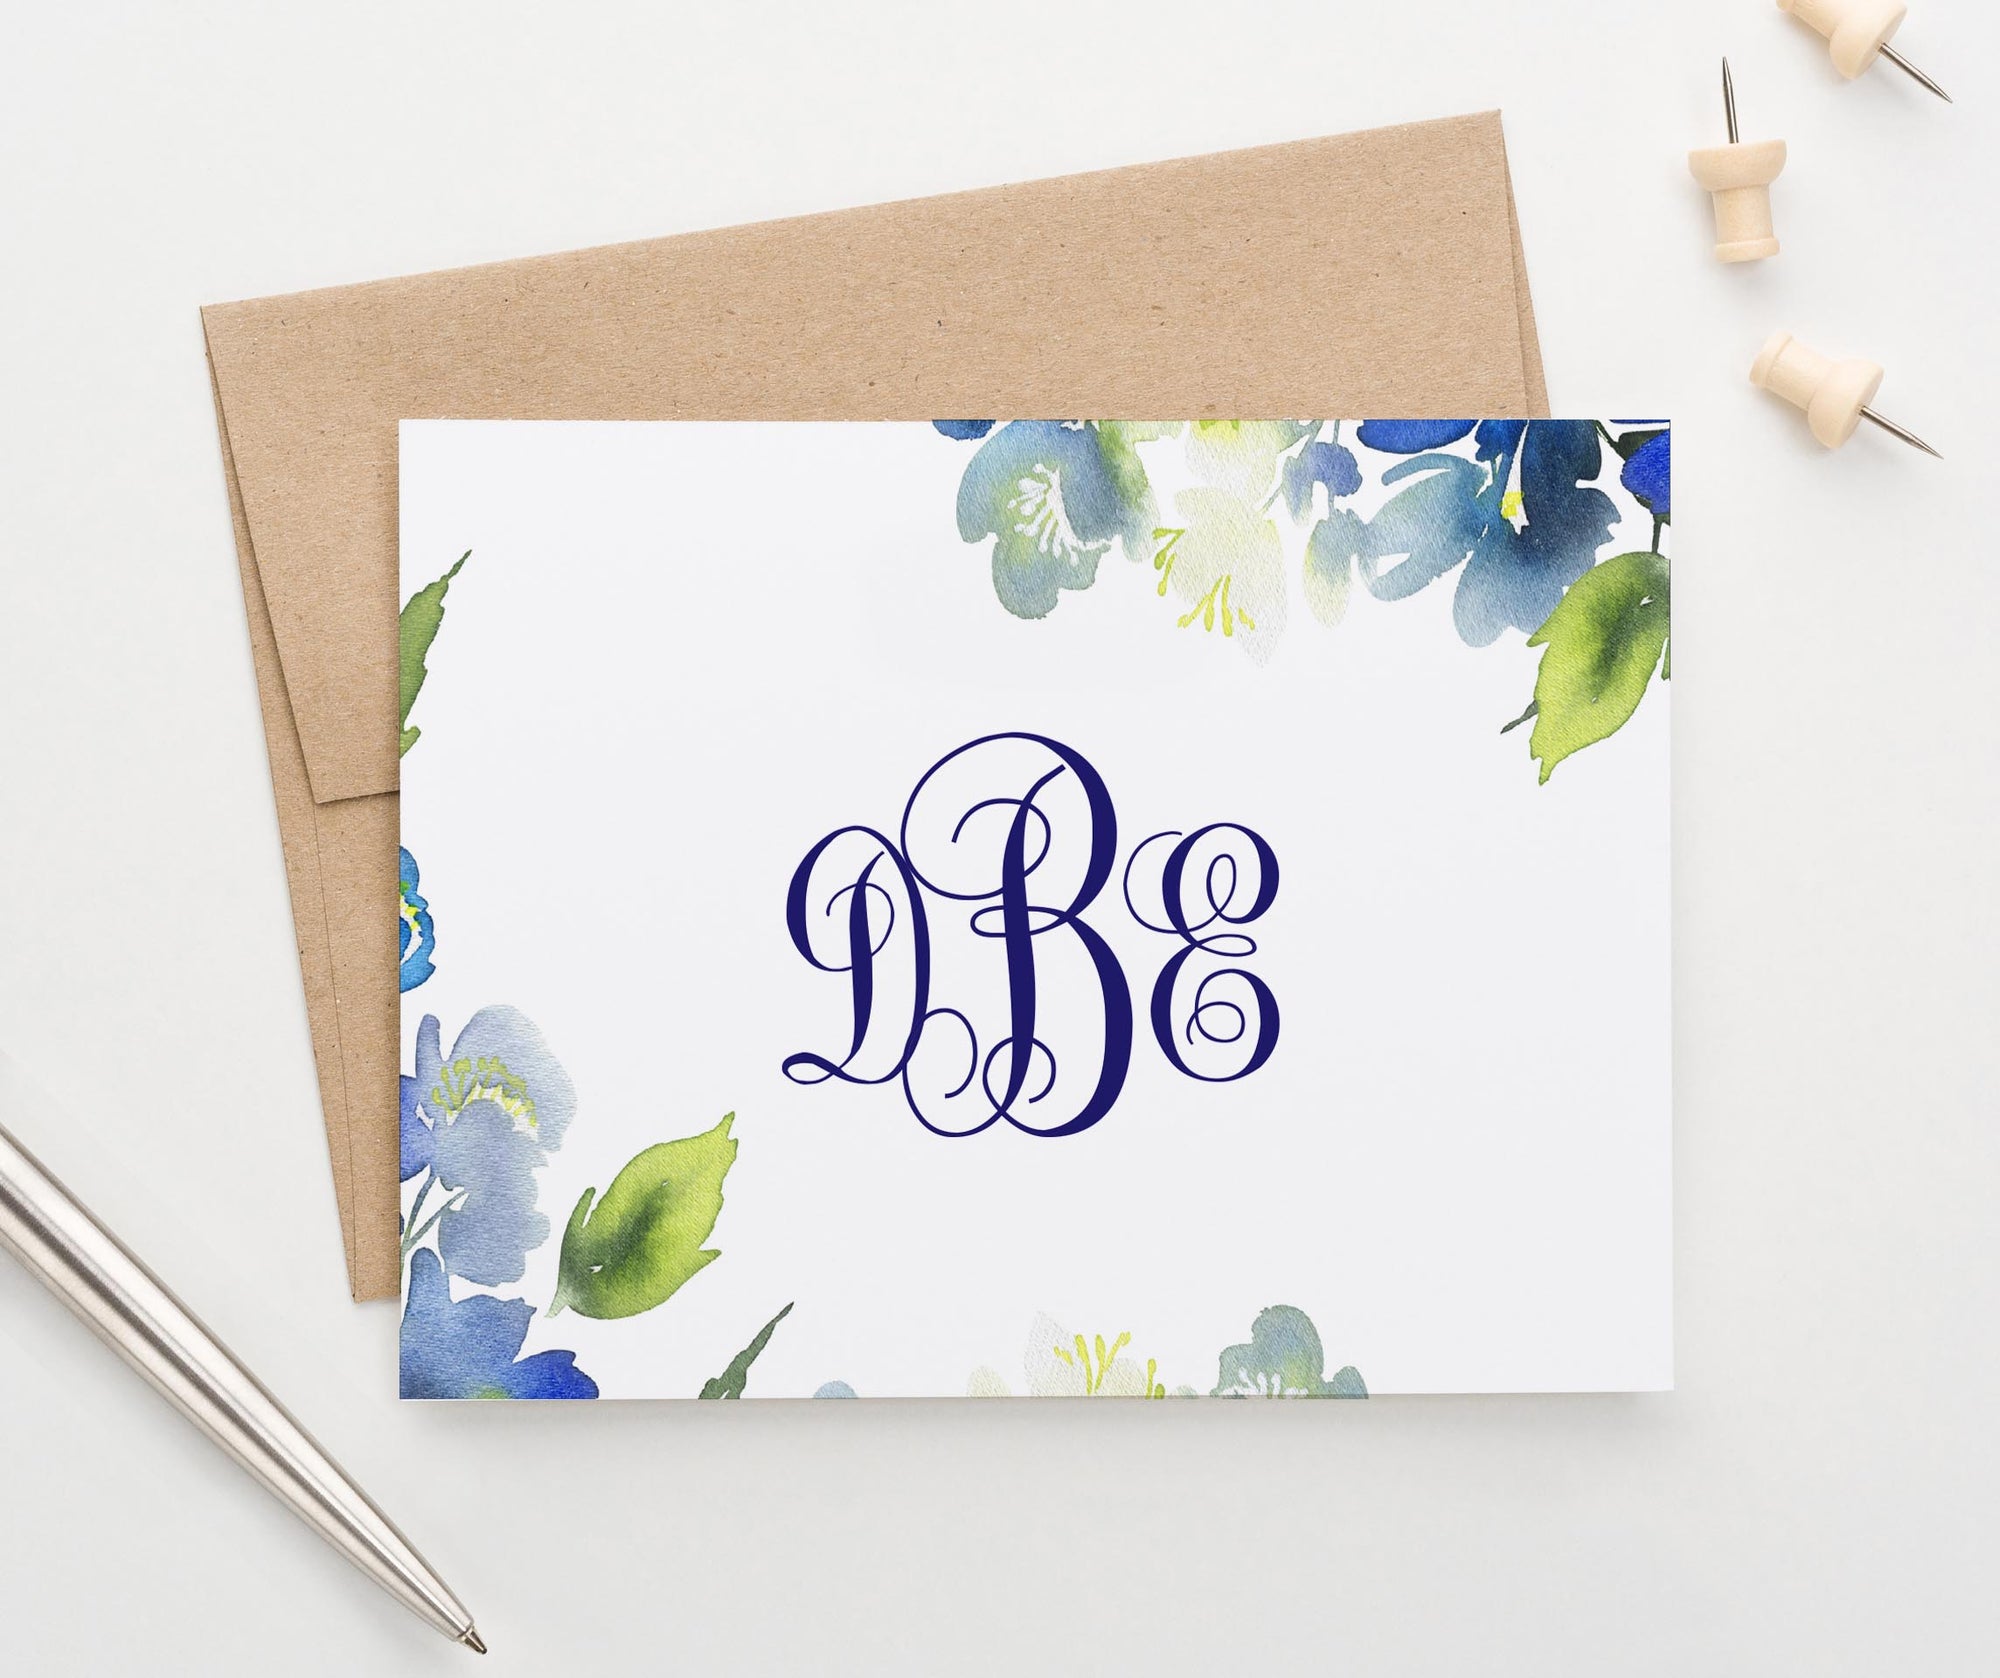    ms063 Elegant Blue Greenery Monogram Note Cards for Women classic floral green